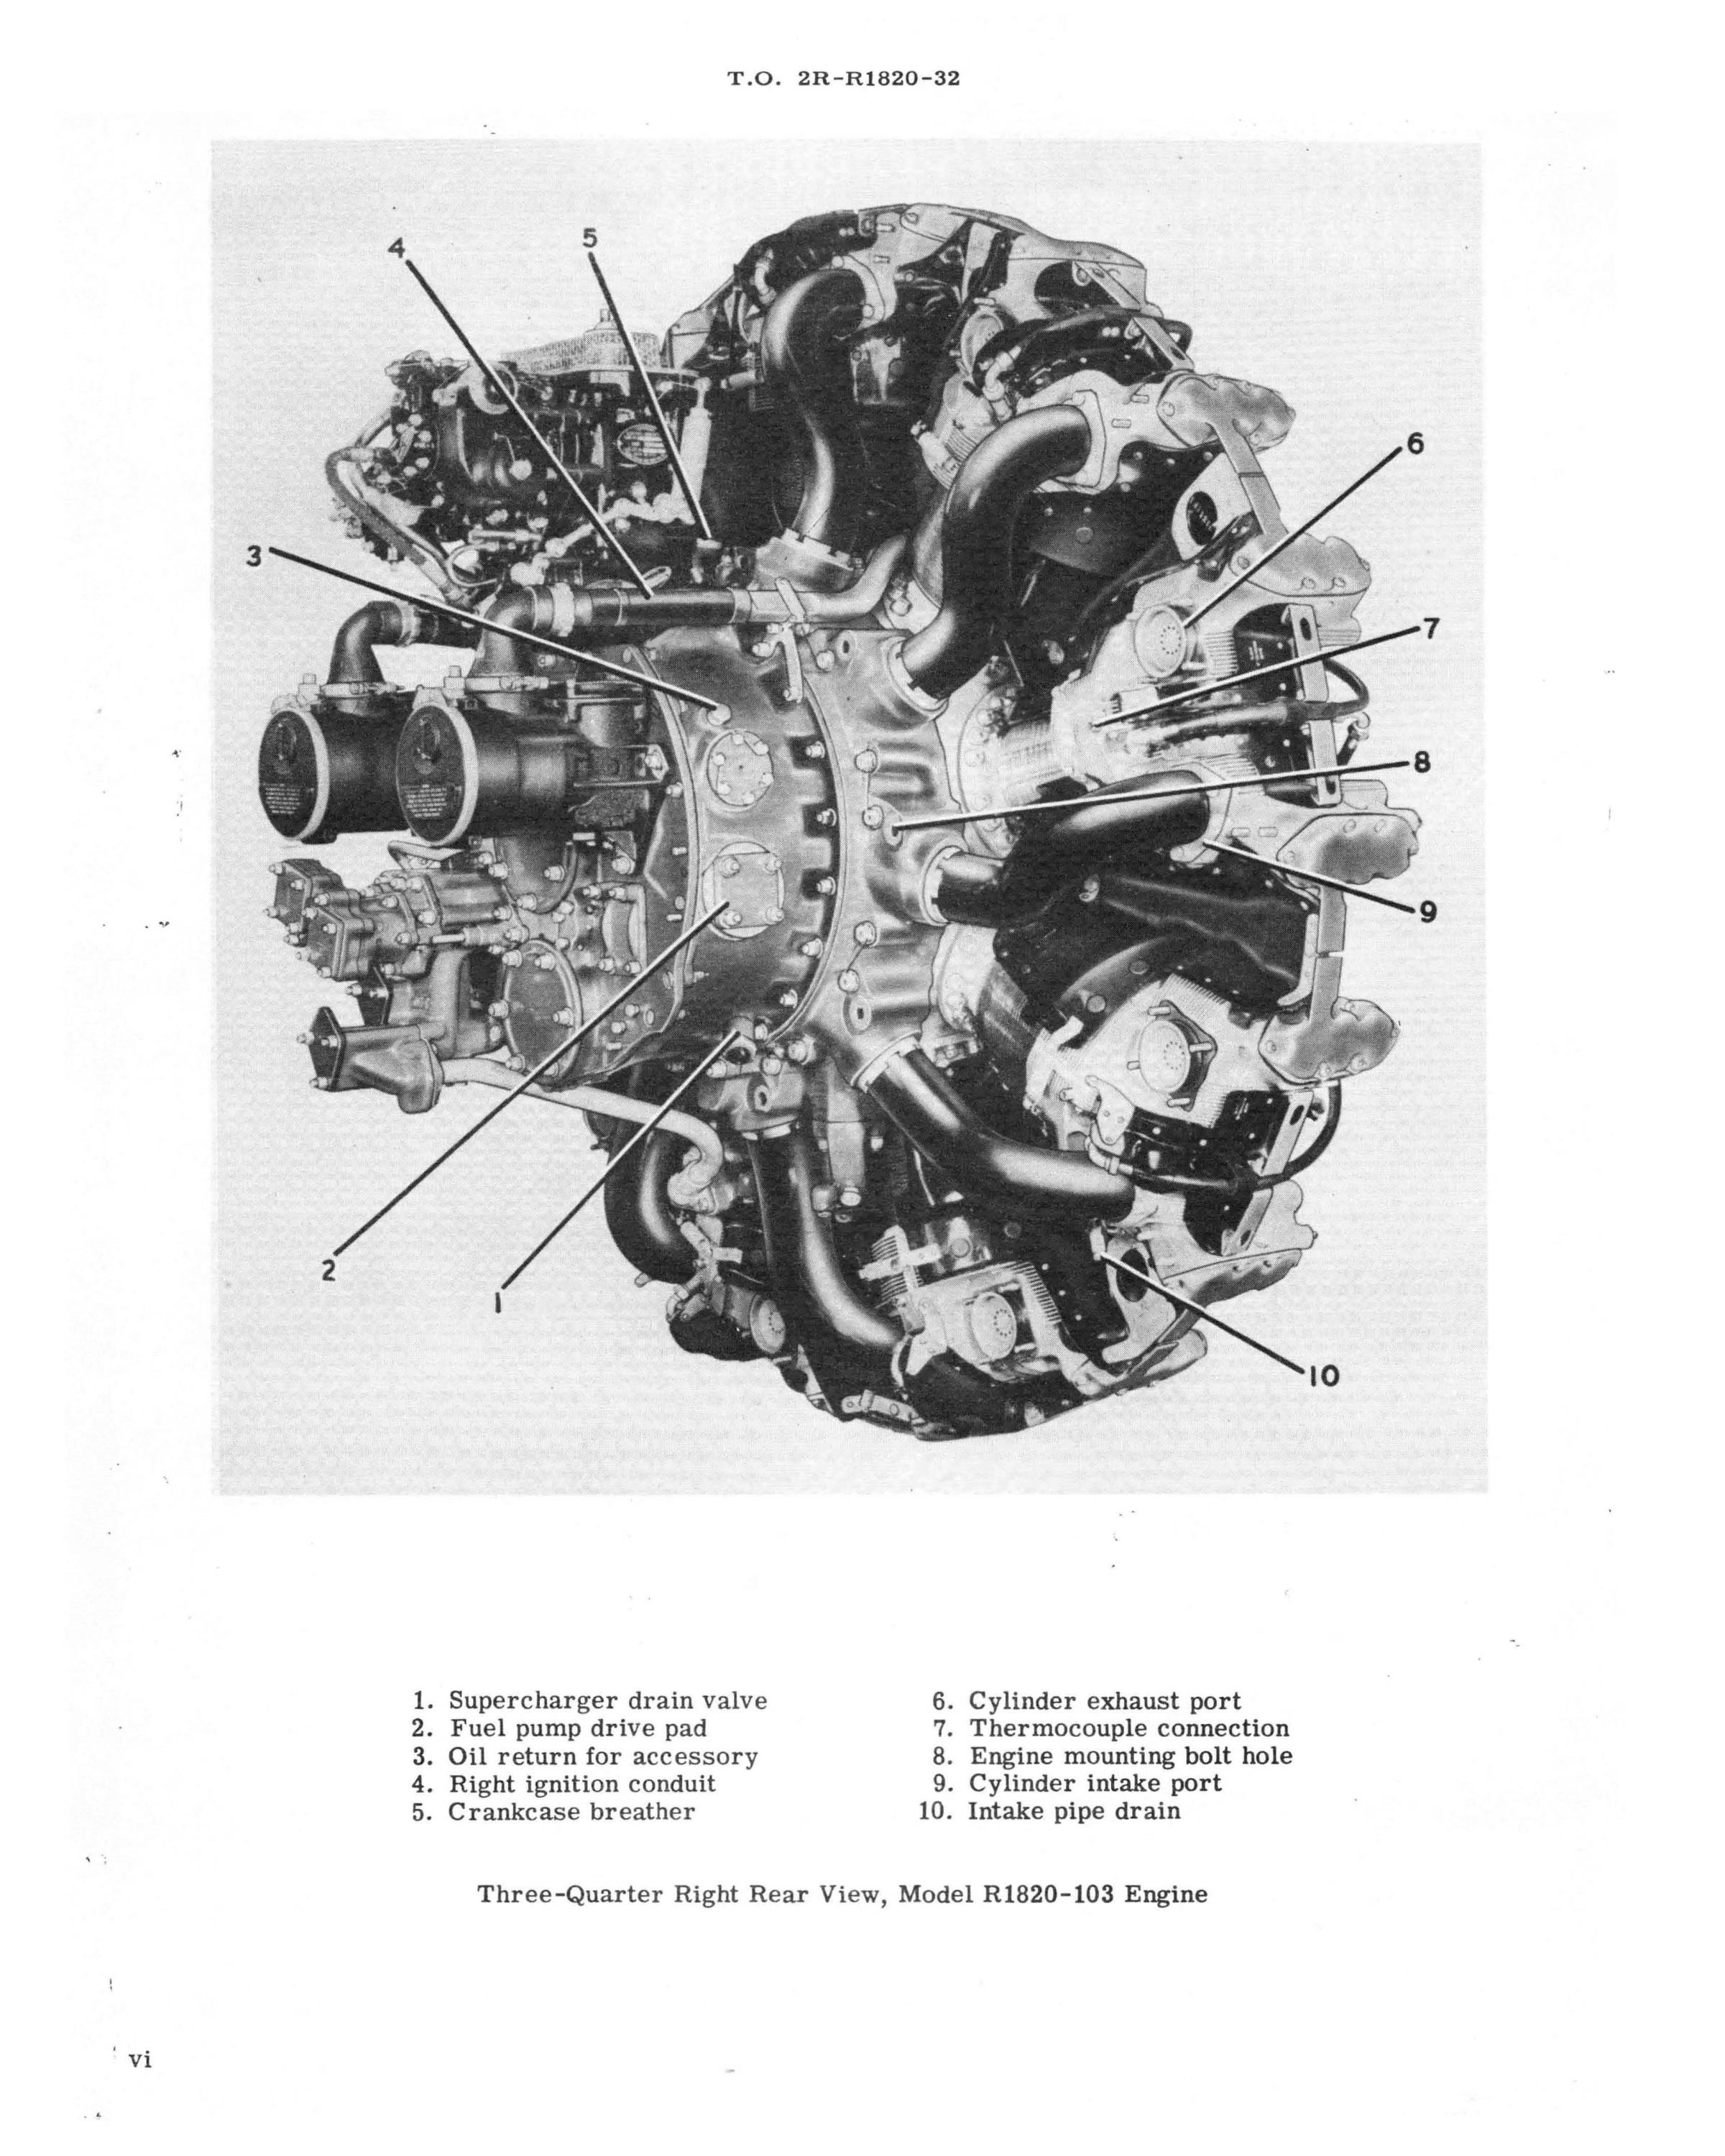 Sample page 8 from AirCorps Library document: Service Instructions for Model R-1820-103 Engine